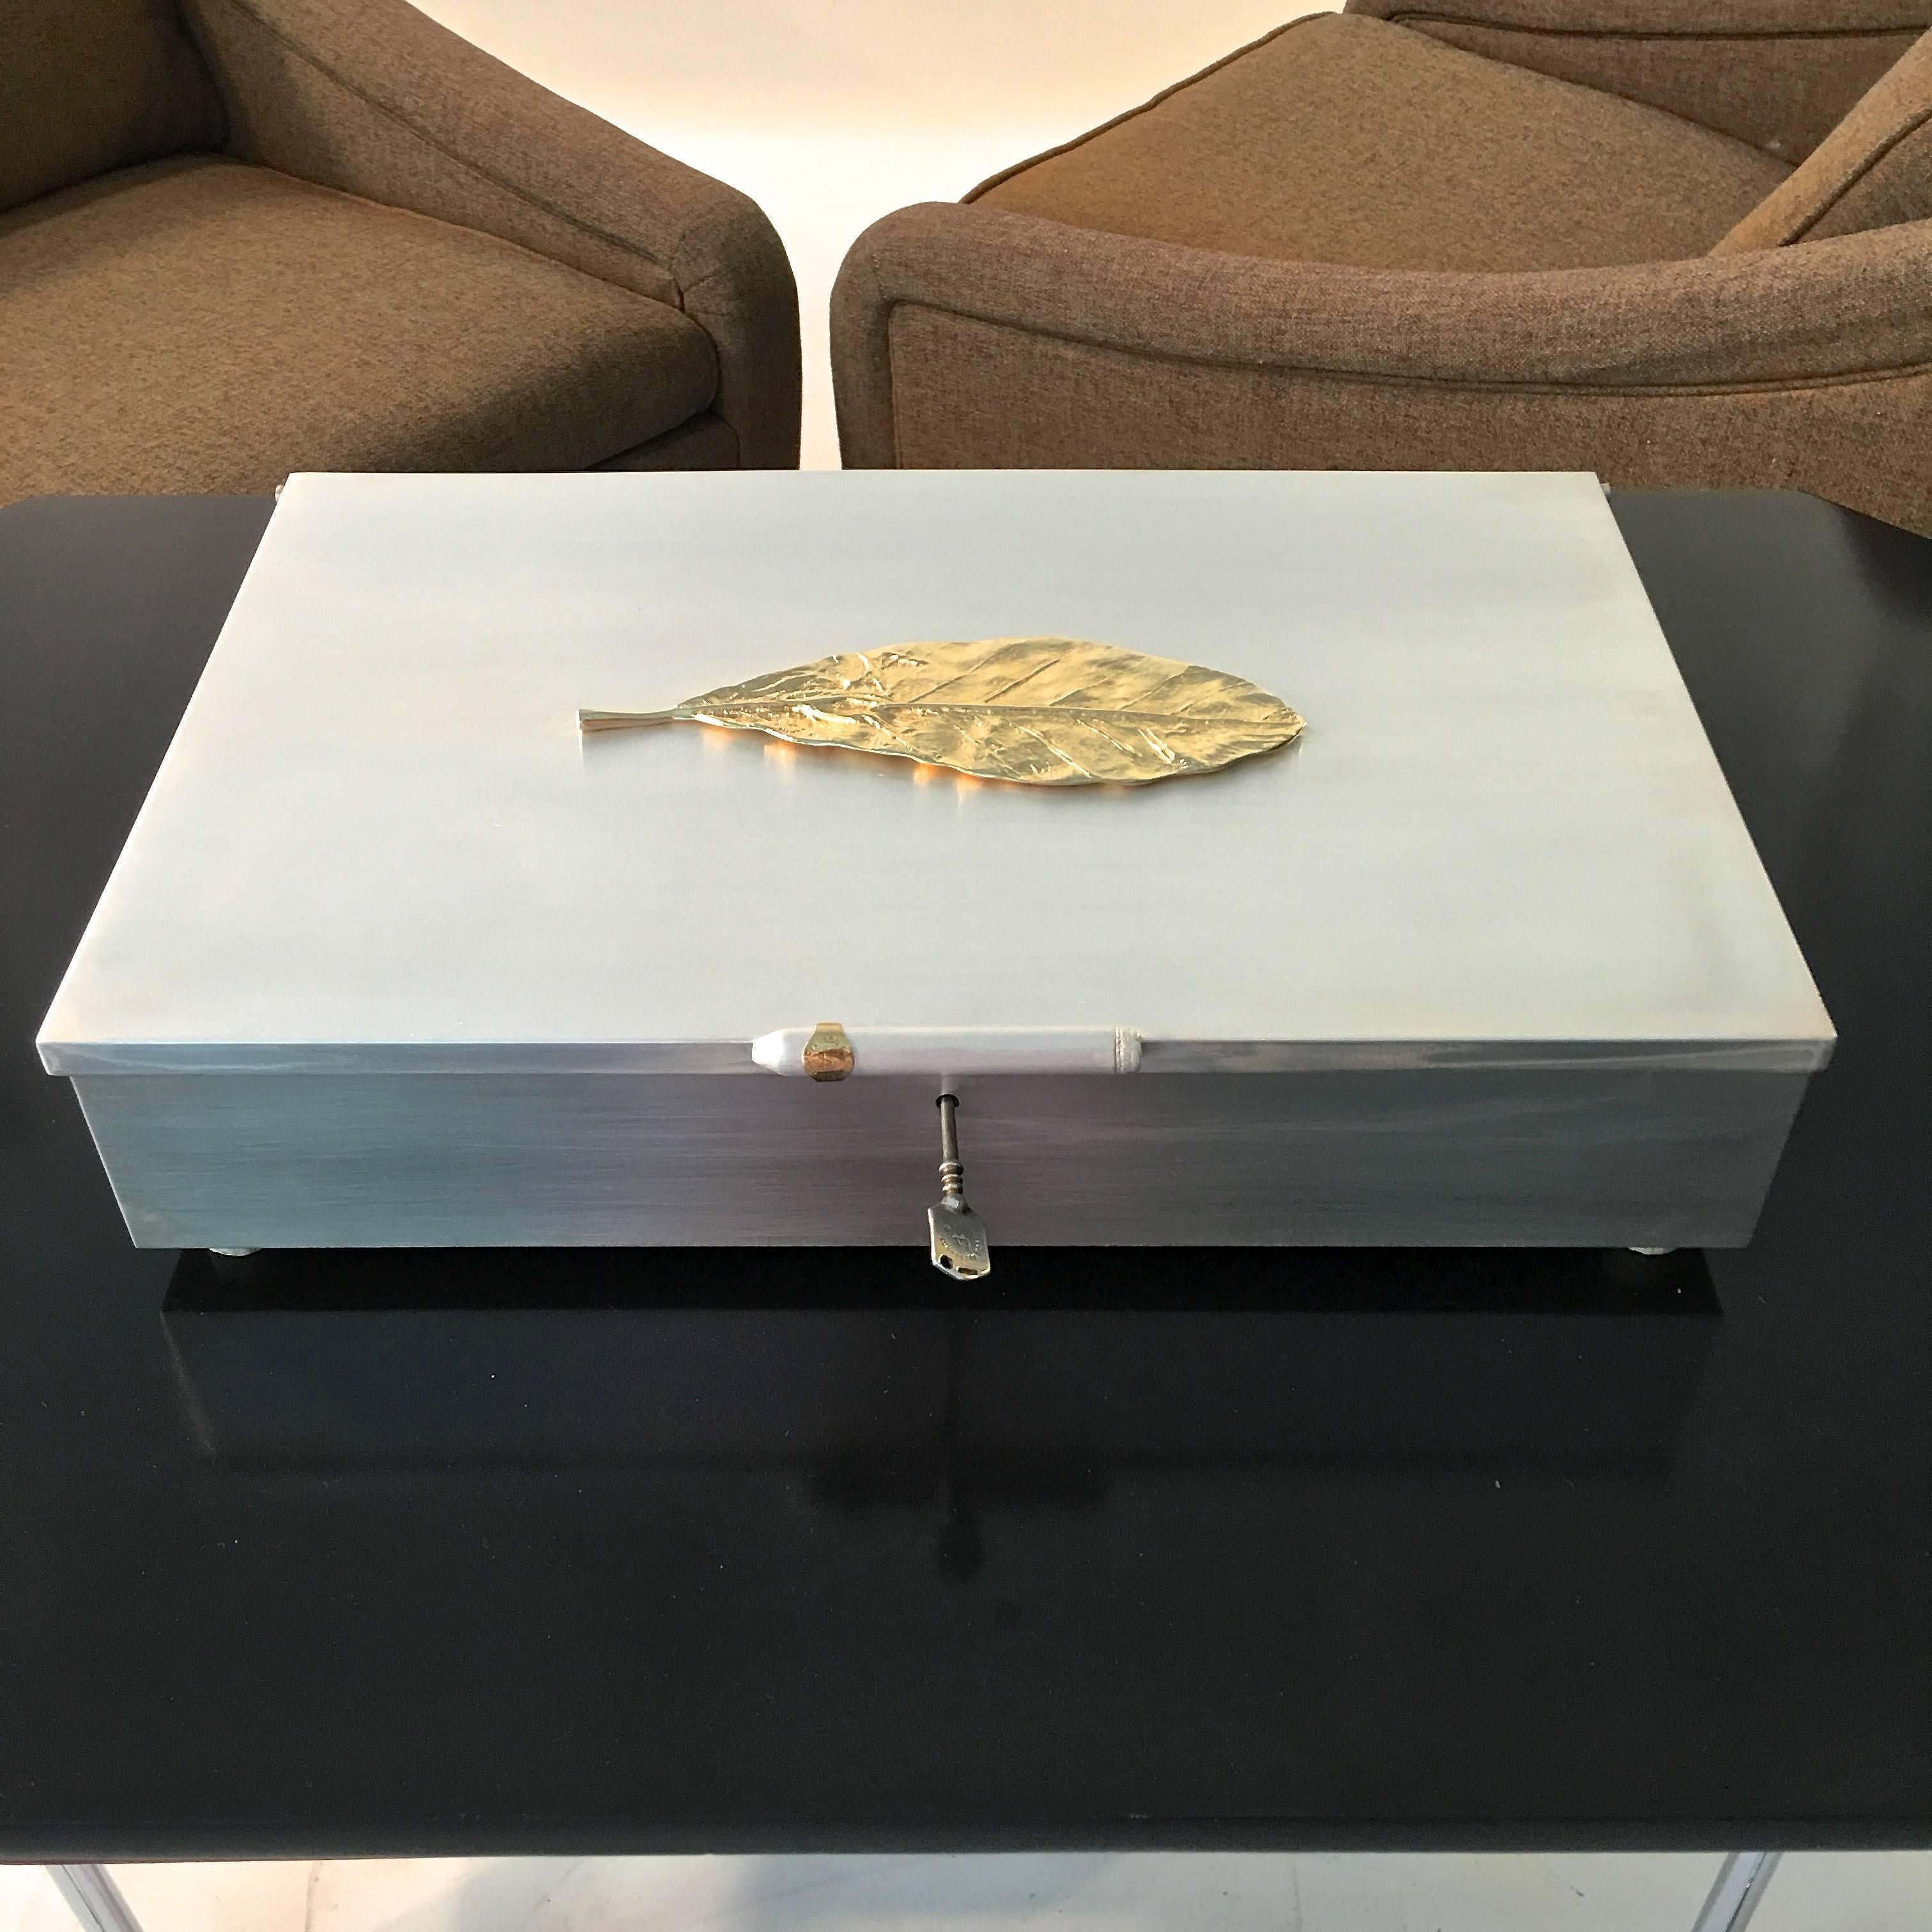 Extra large sterling silver cigar humidor prototype custom-made by a renowned gunsmith. Measures: 18 inches wide by 12 inches deep by 4 inches high on four bone feet. Sterling silver on all six sides of the lidded hinged box, even the